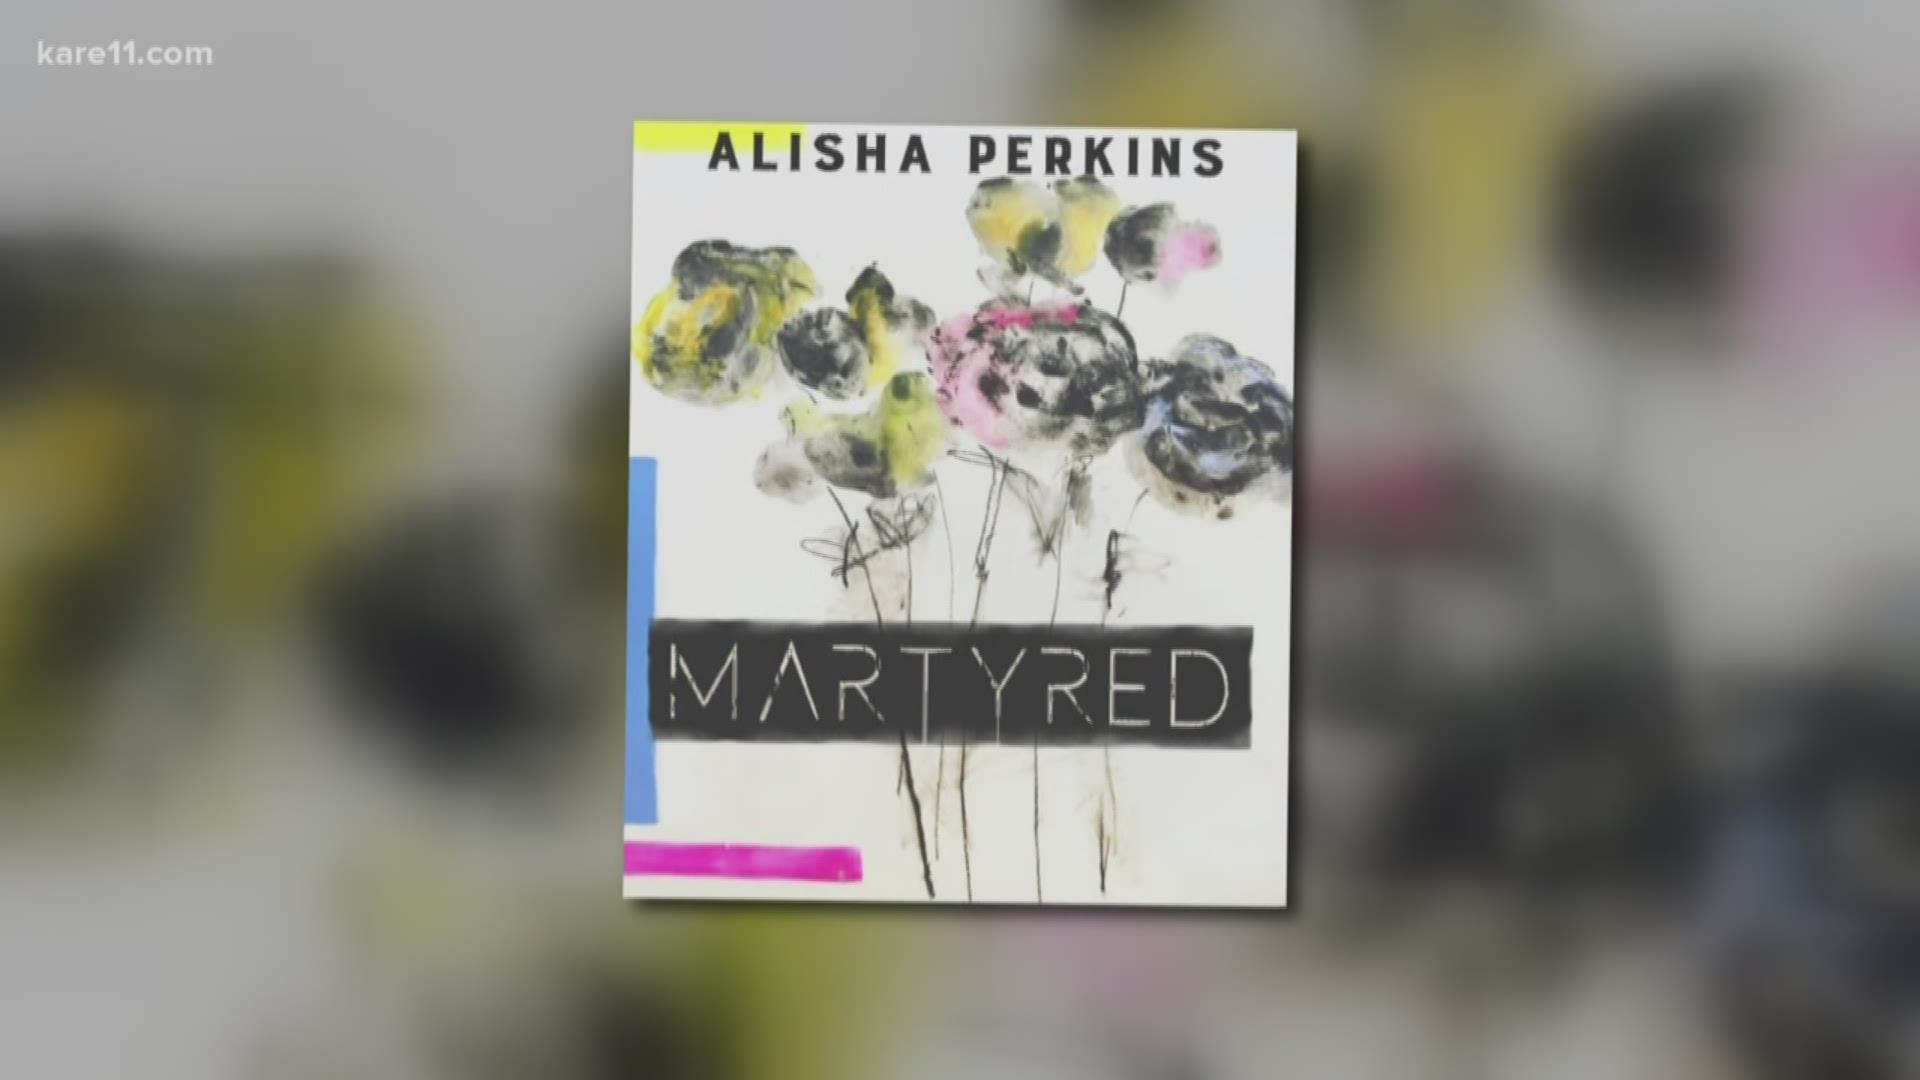 Alisha Perkins' new novel, "Martyred," is about three women who reach a breaking point after sacrificing for their families - and society.